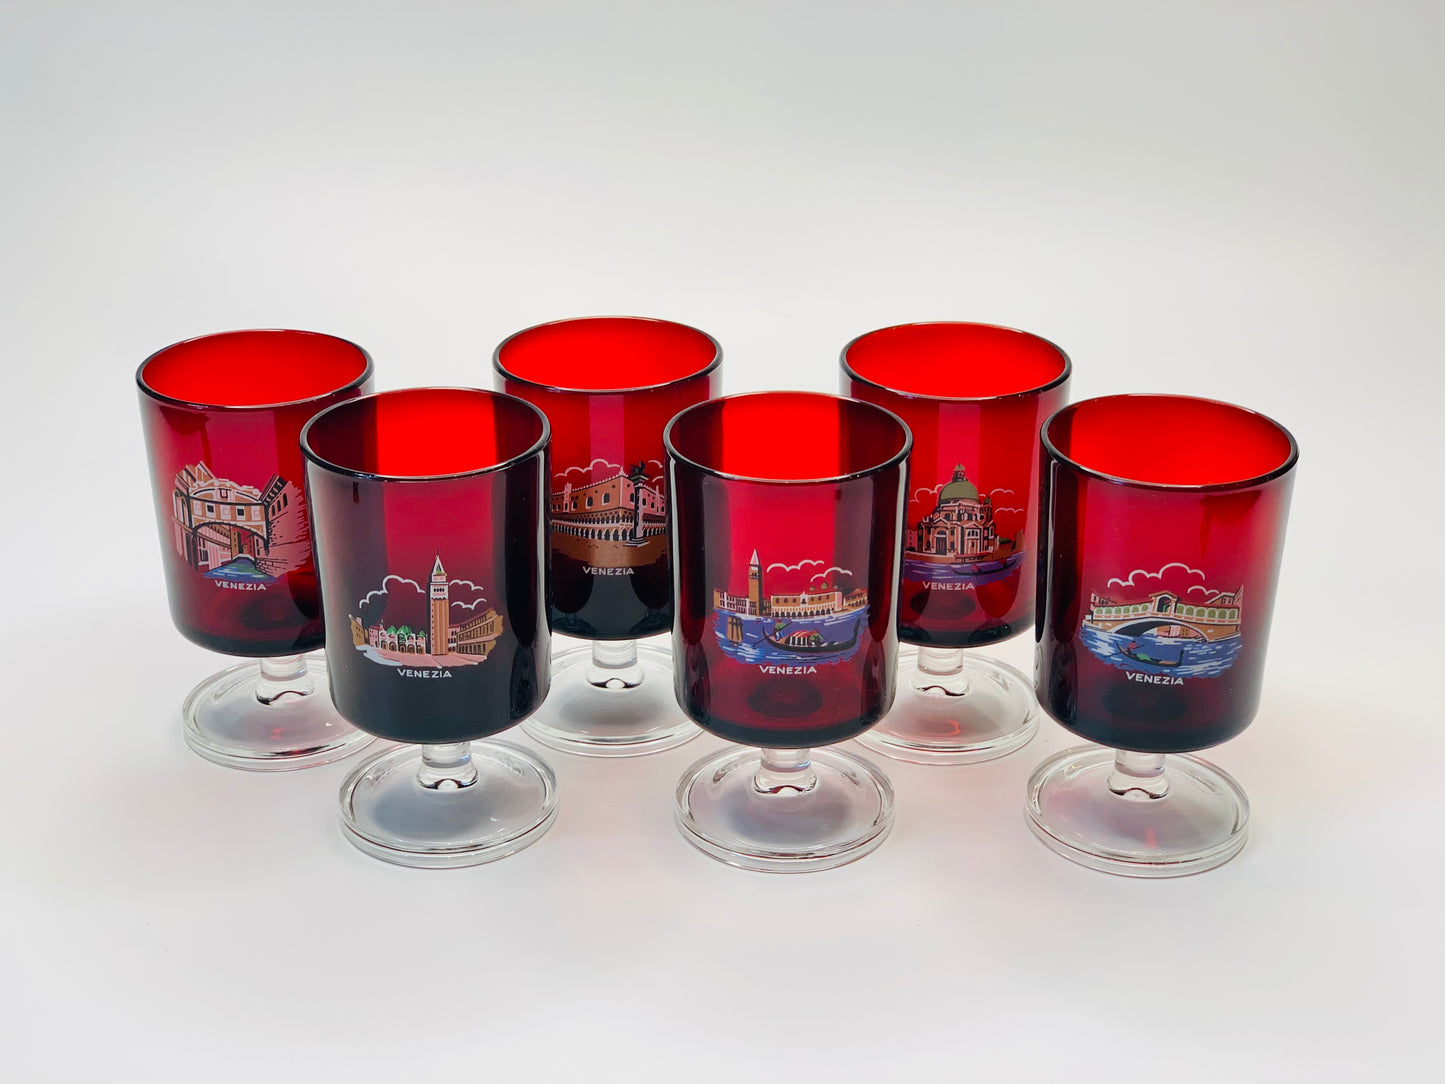 Ruby glass stemware depicting a different famous site of Venice on each glass